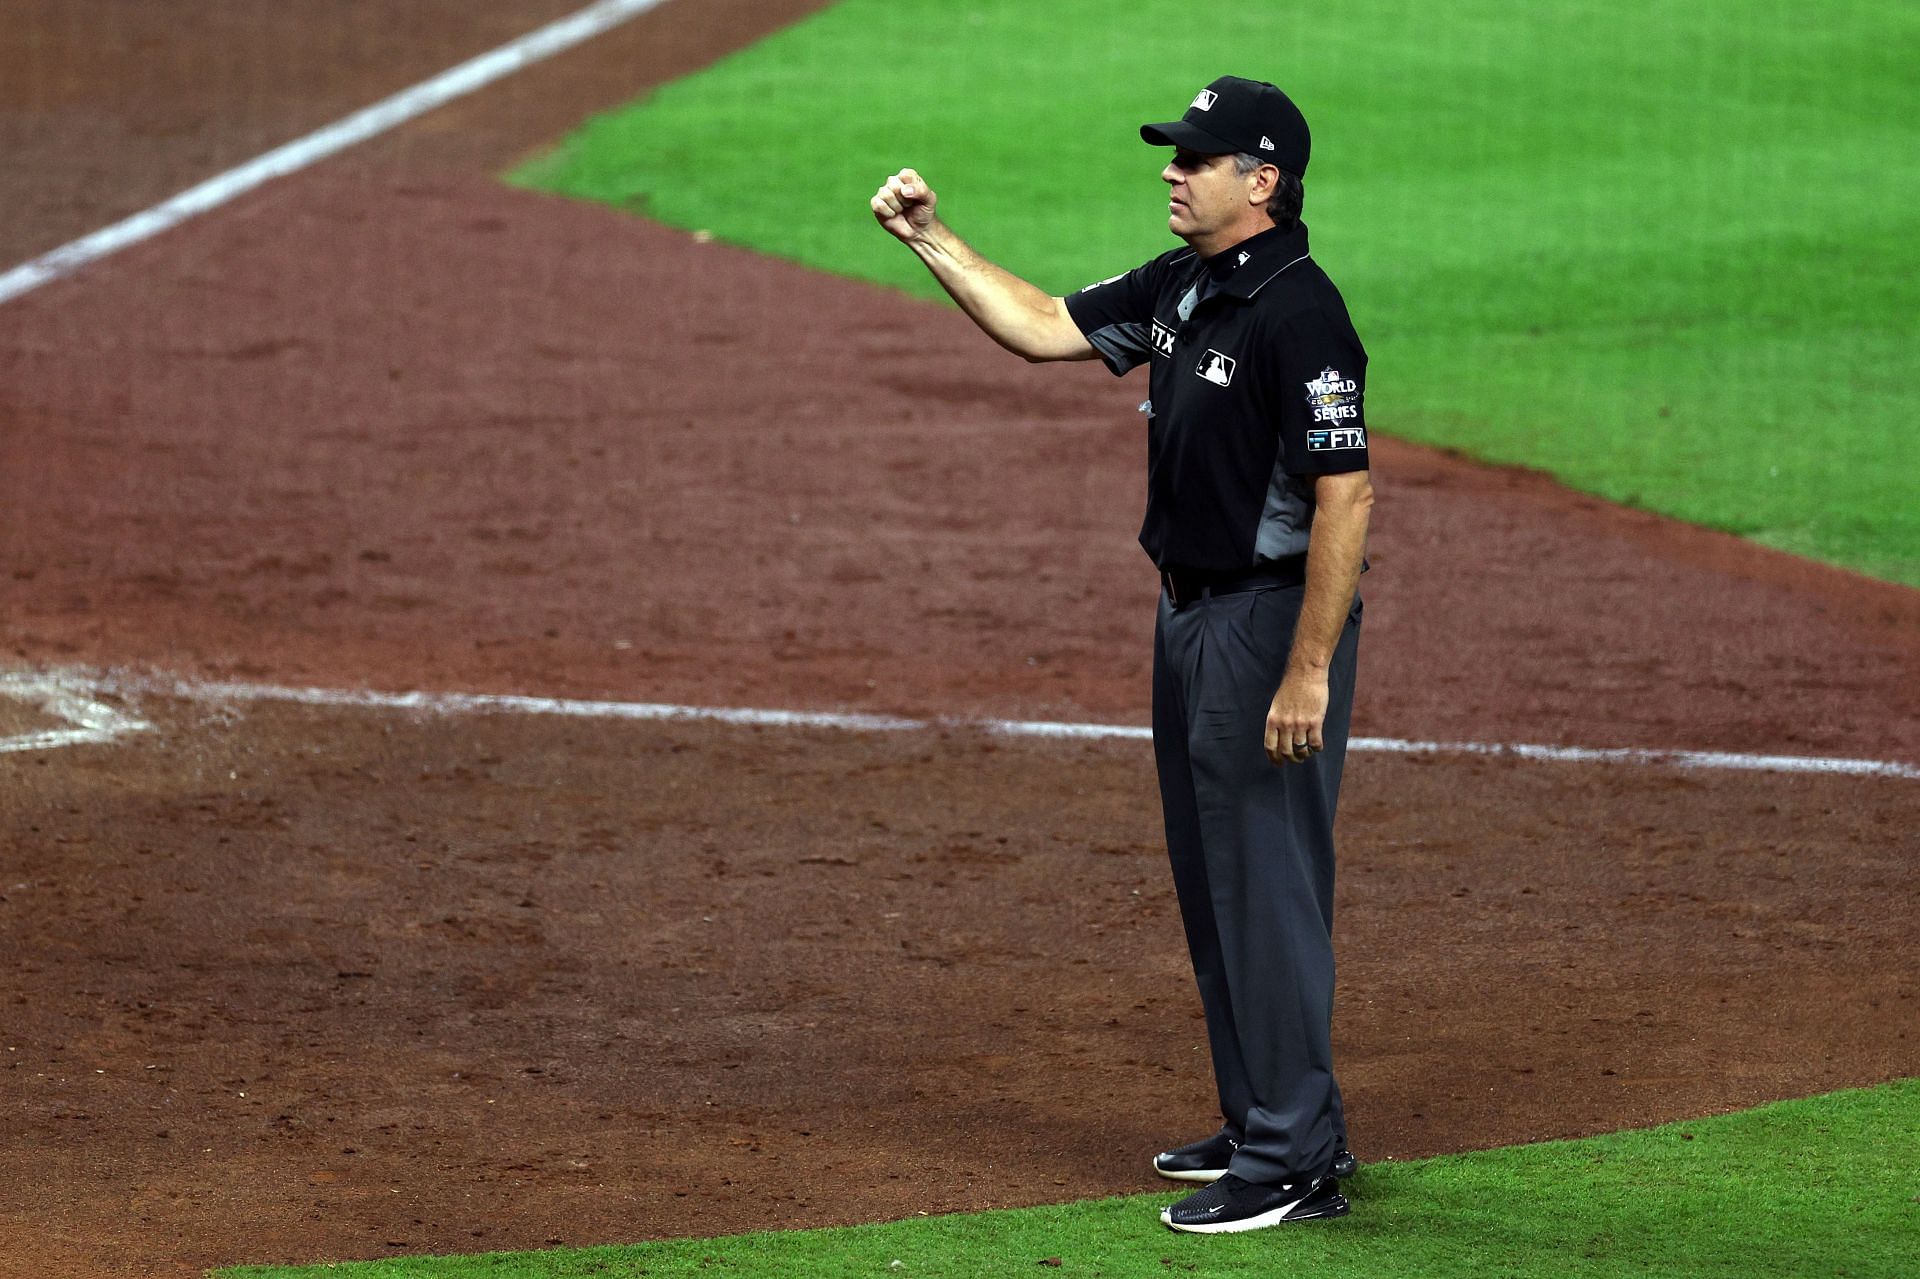 MLB umpires just in Orioles spring training game proved not needed